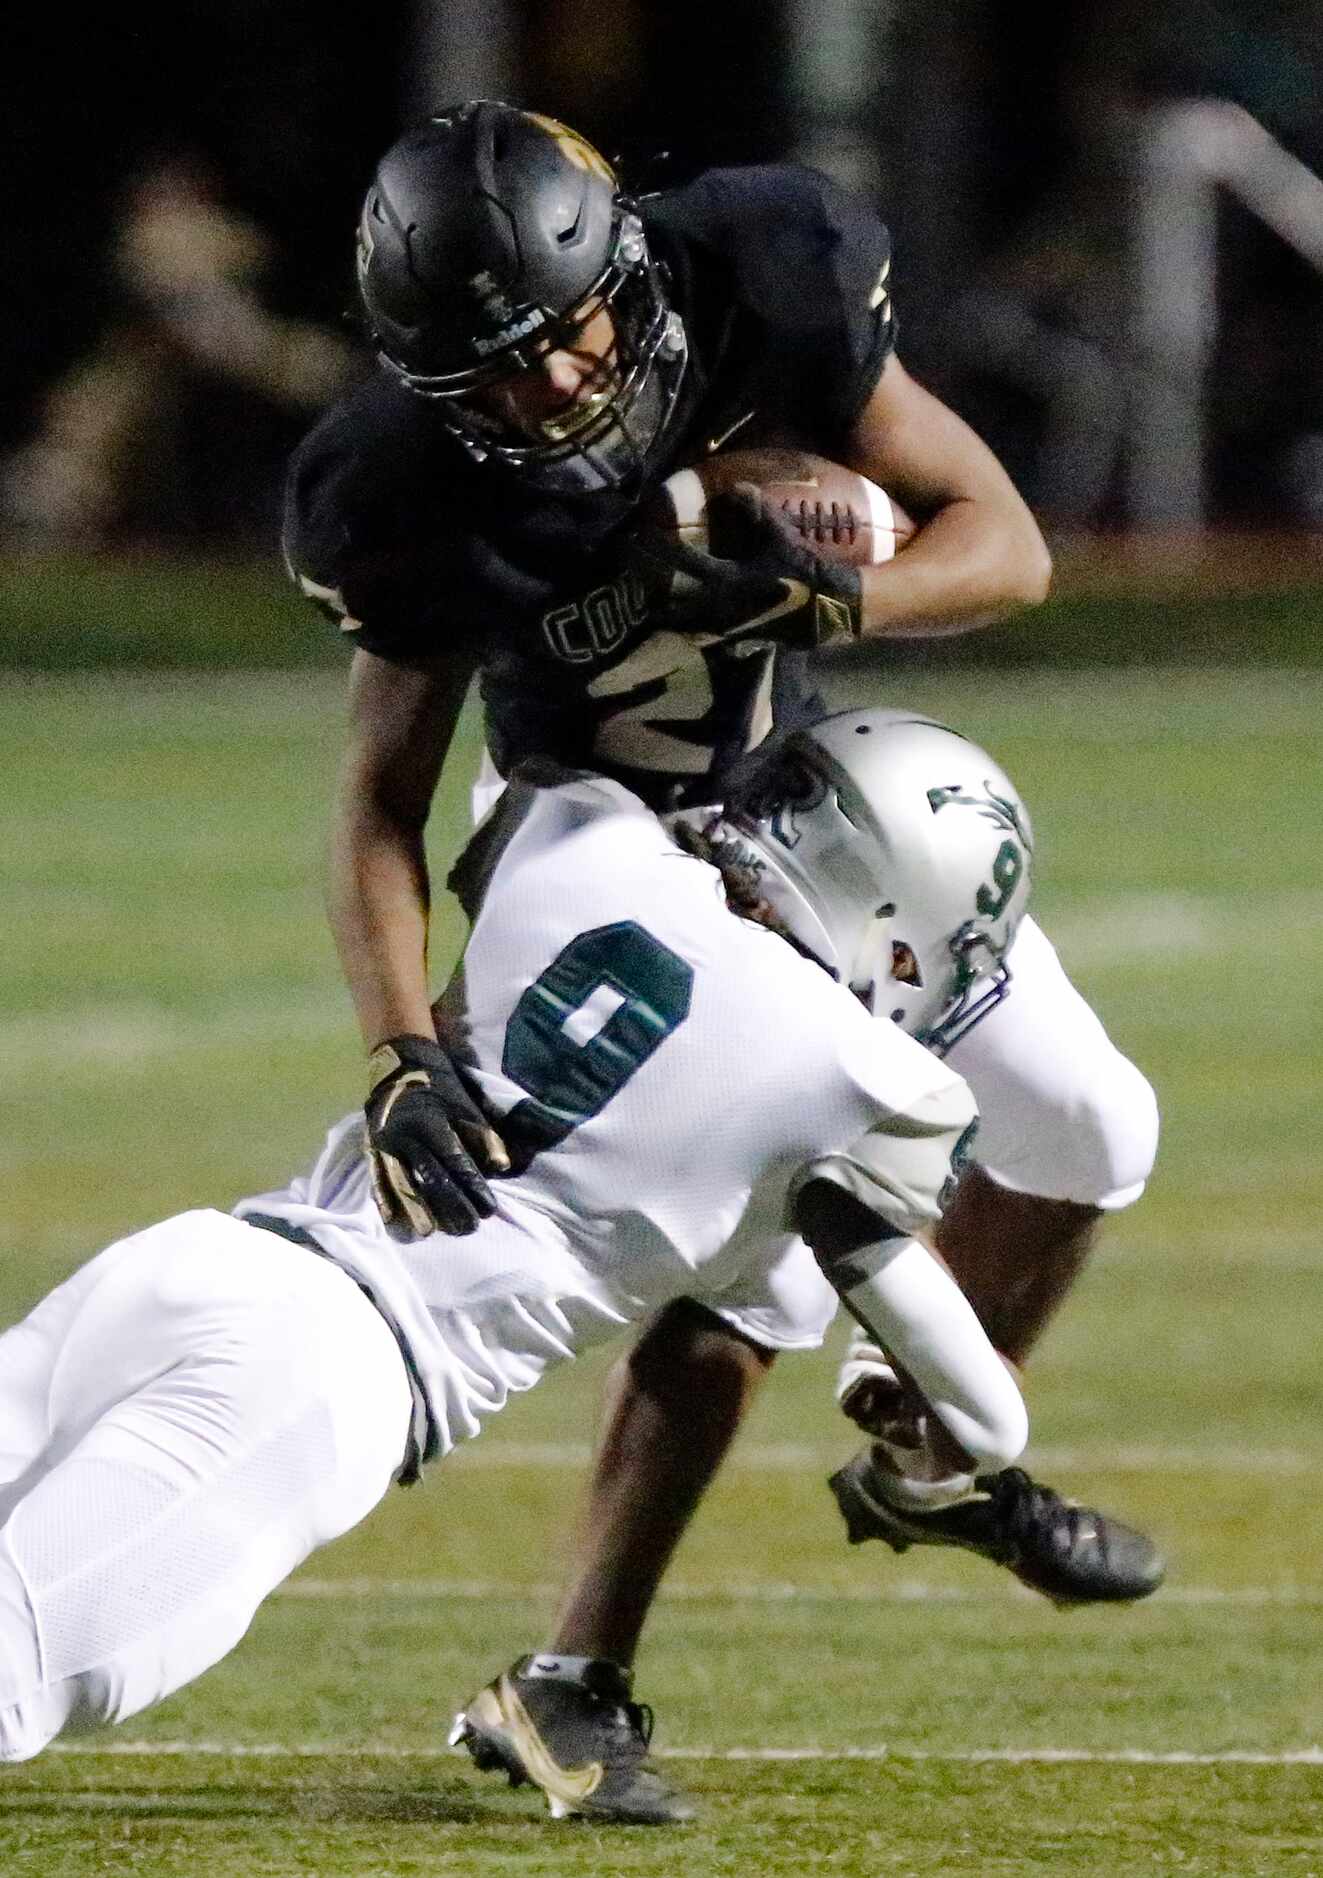 The Colony High School running back Kione Roberson (27) was able to escape this tackle...